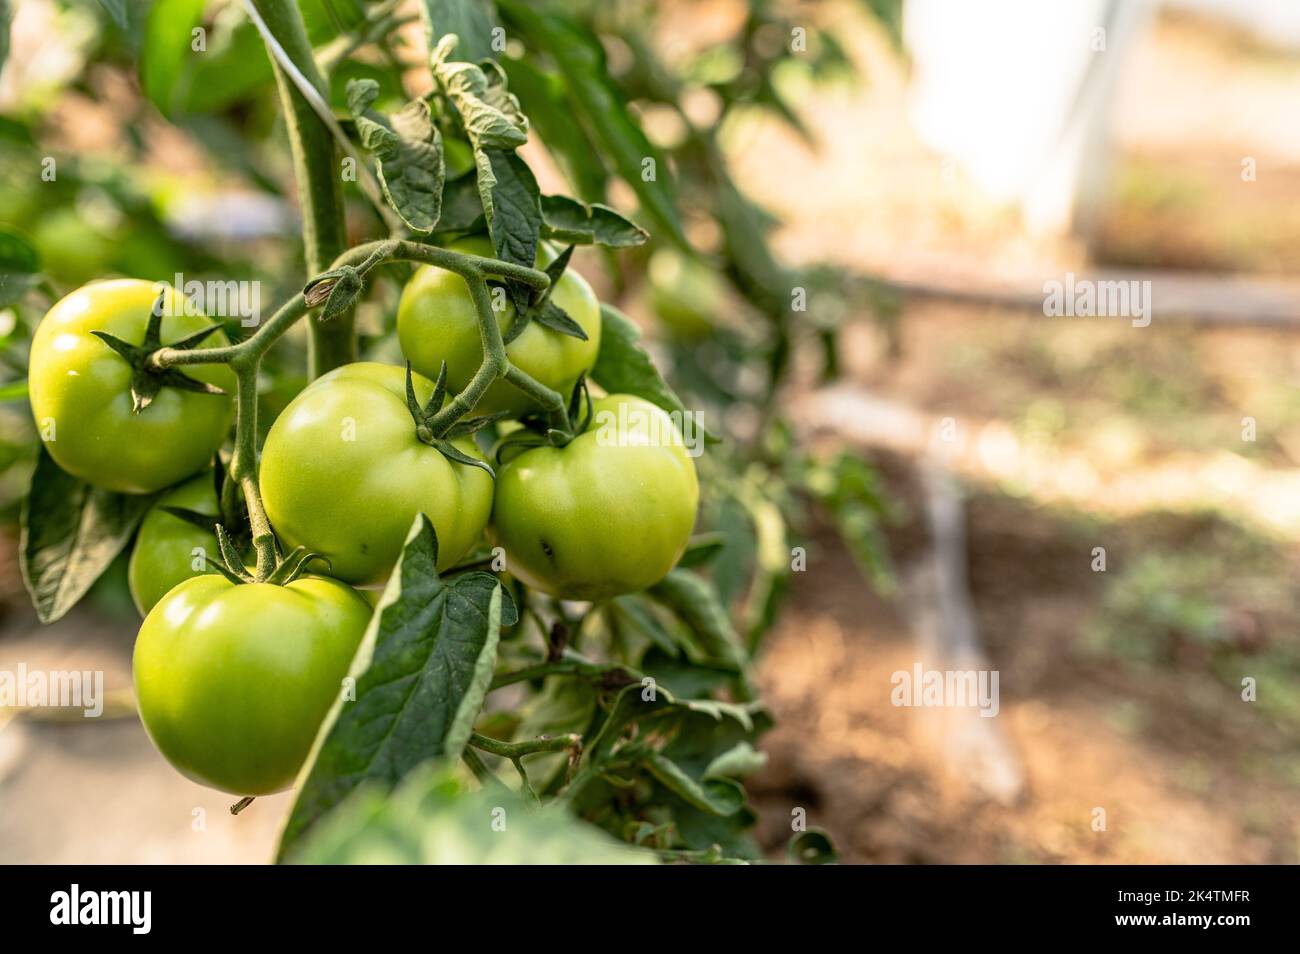 Tomato plants in greenhouse Green tomatoes plantation. Organic farming, young tomato cluster plants growth in greenhouse. Stock Photo